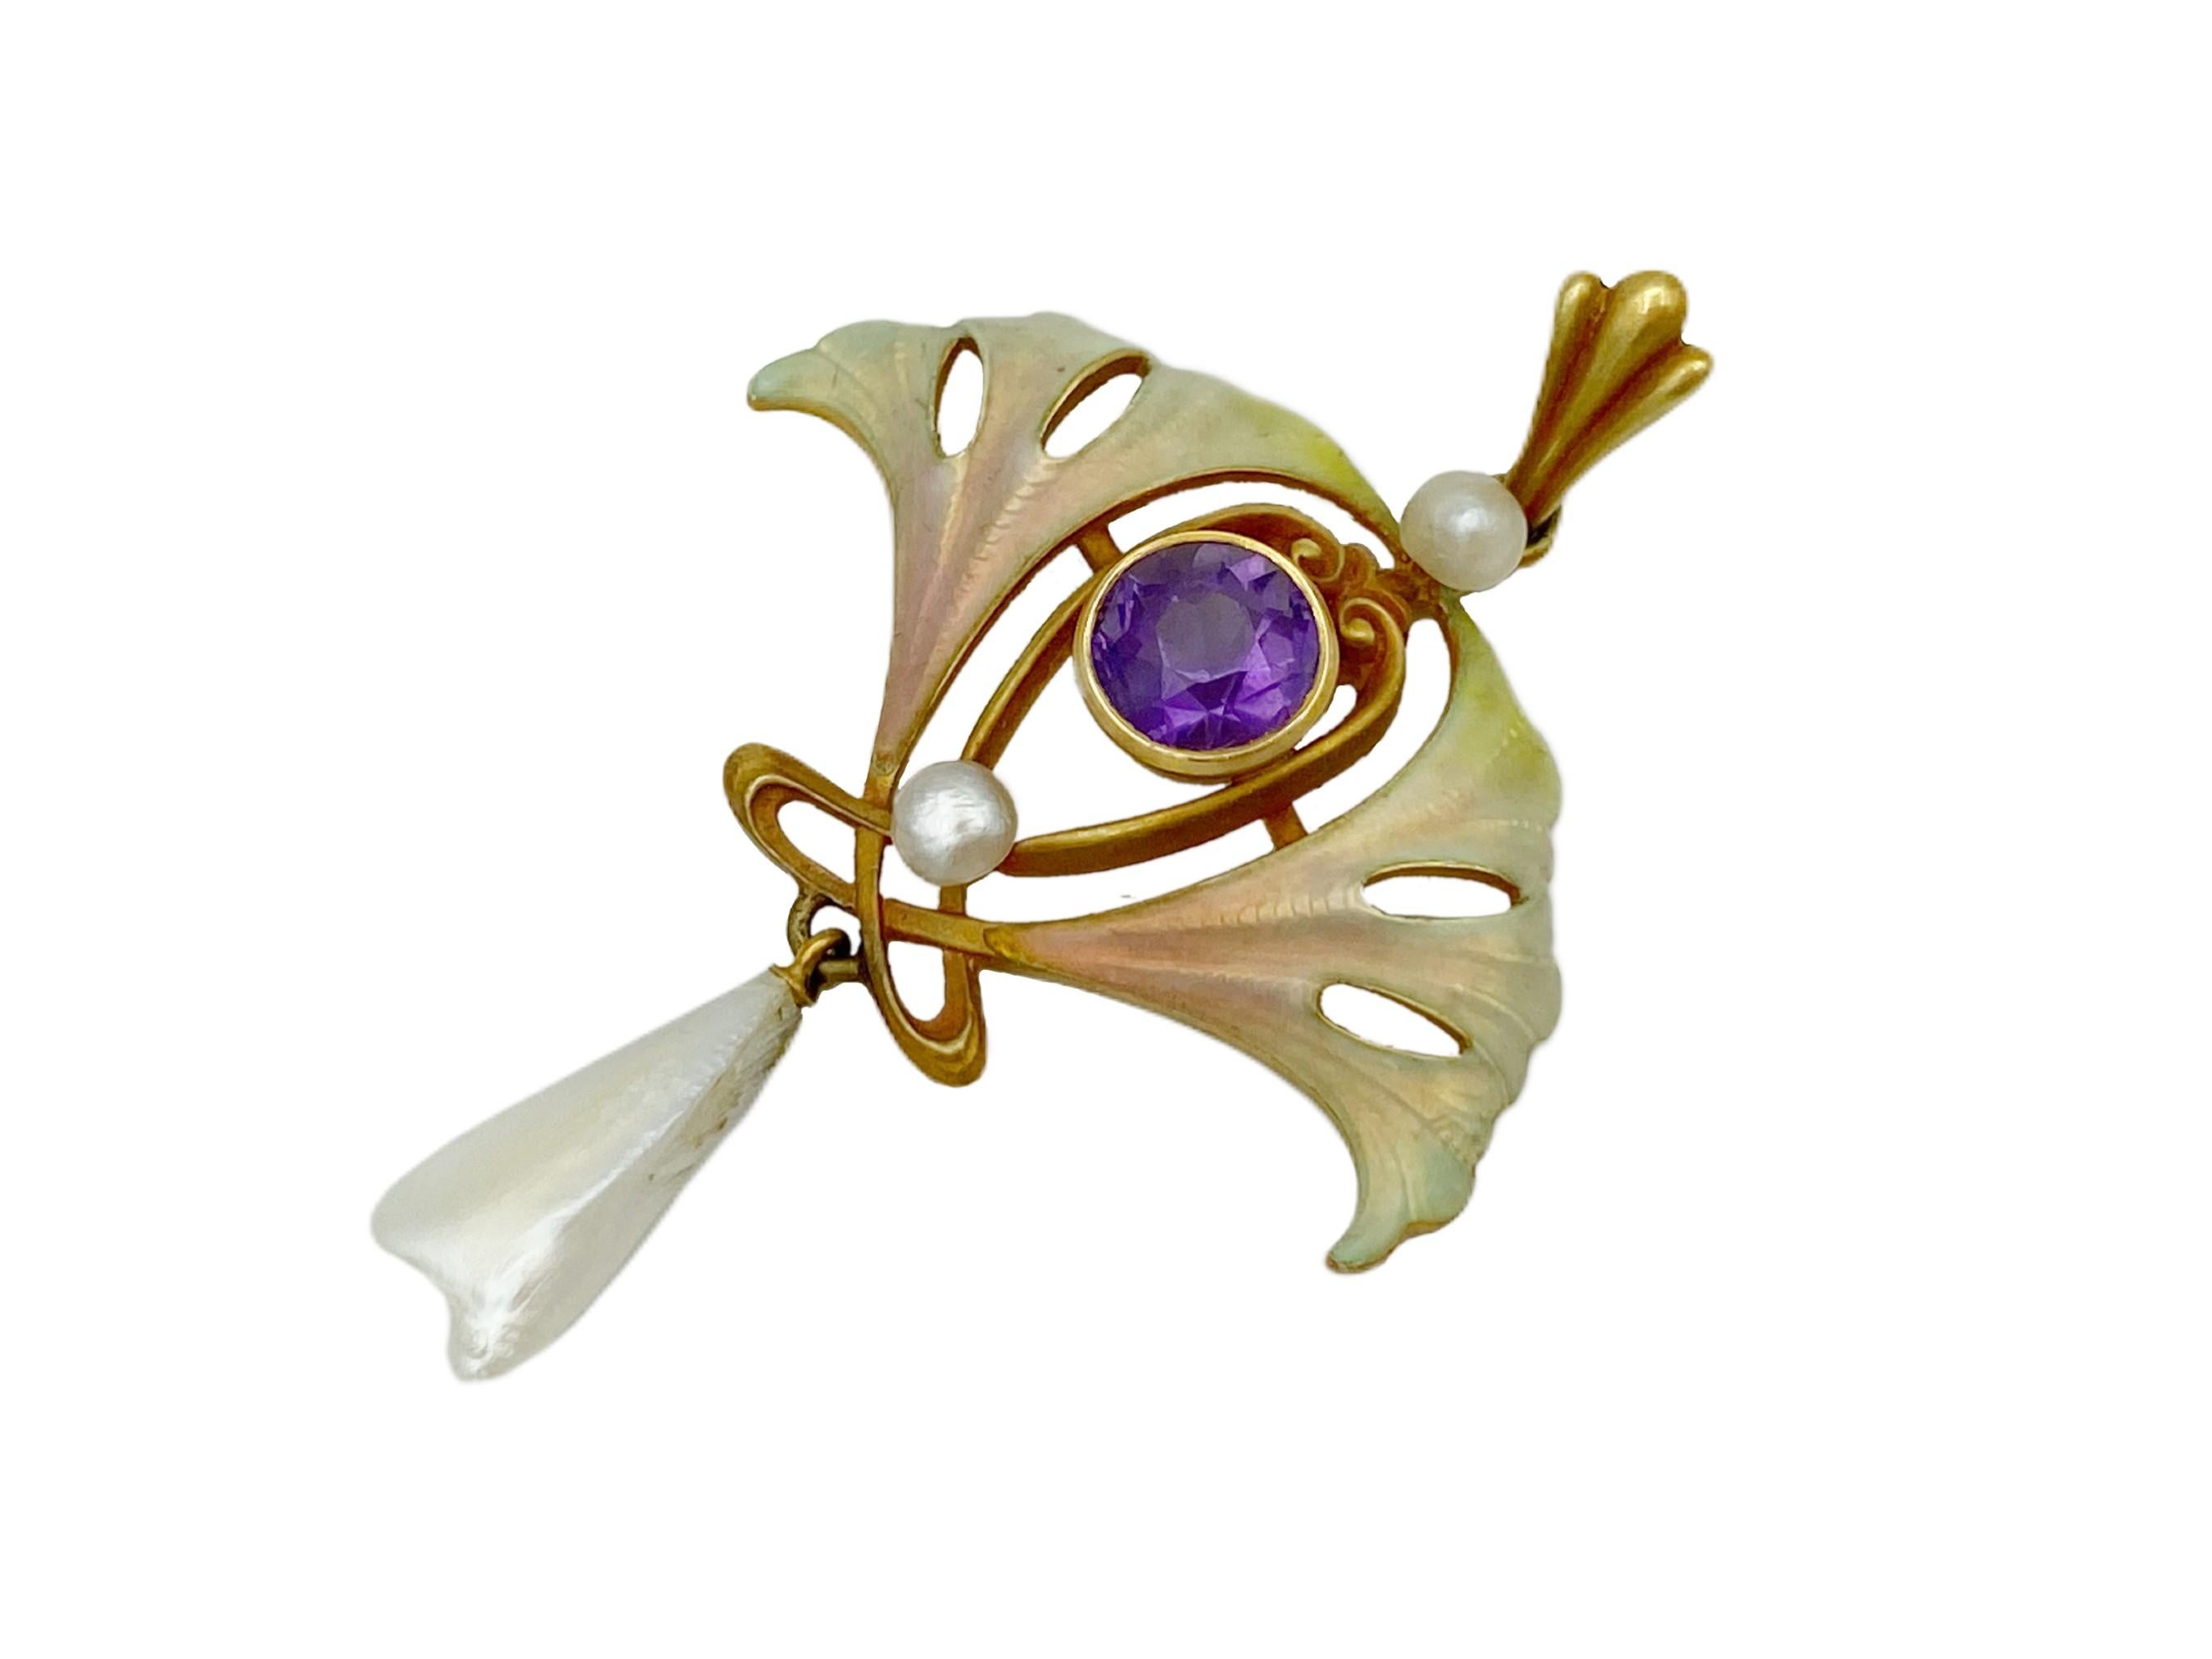 An extremely fine example of Art Nouveau period jewelry, this exquisite pendant is a timeless treasure of the highest quality. Crafted from 14k yellow gold, accented with amethyst and natural pearls, it is adorned with an intricately detailed gingko